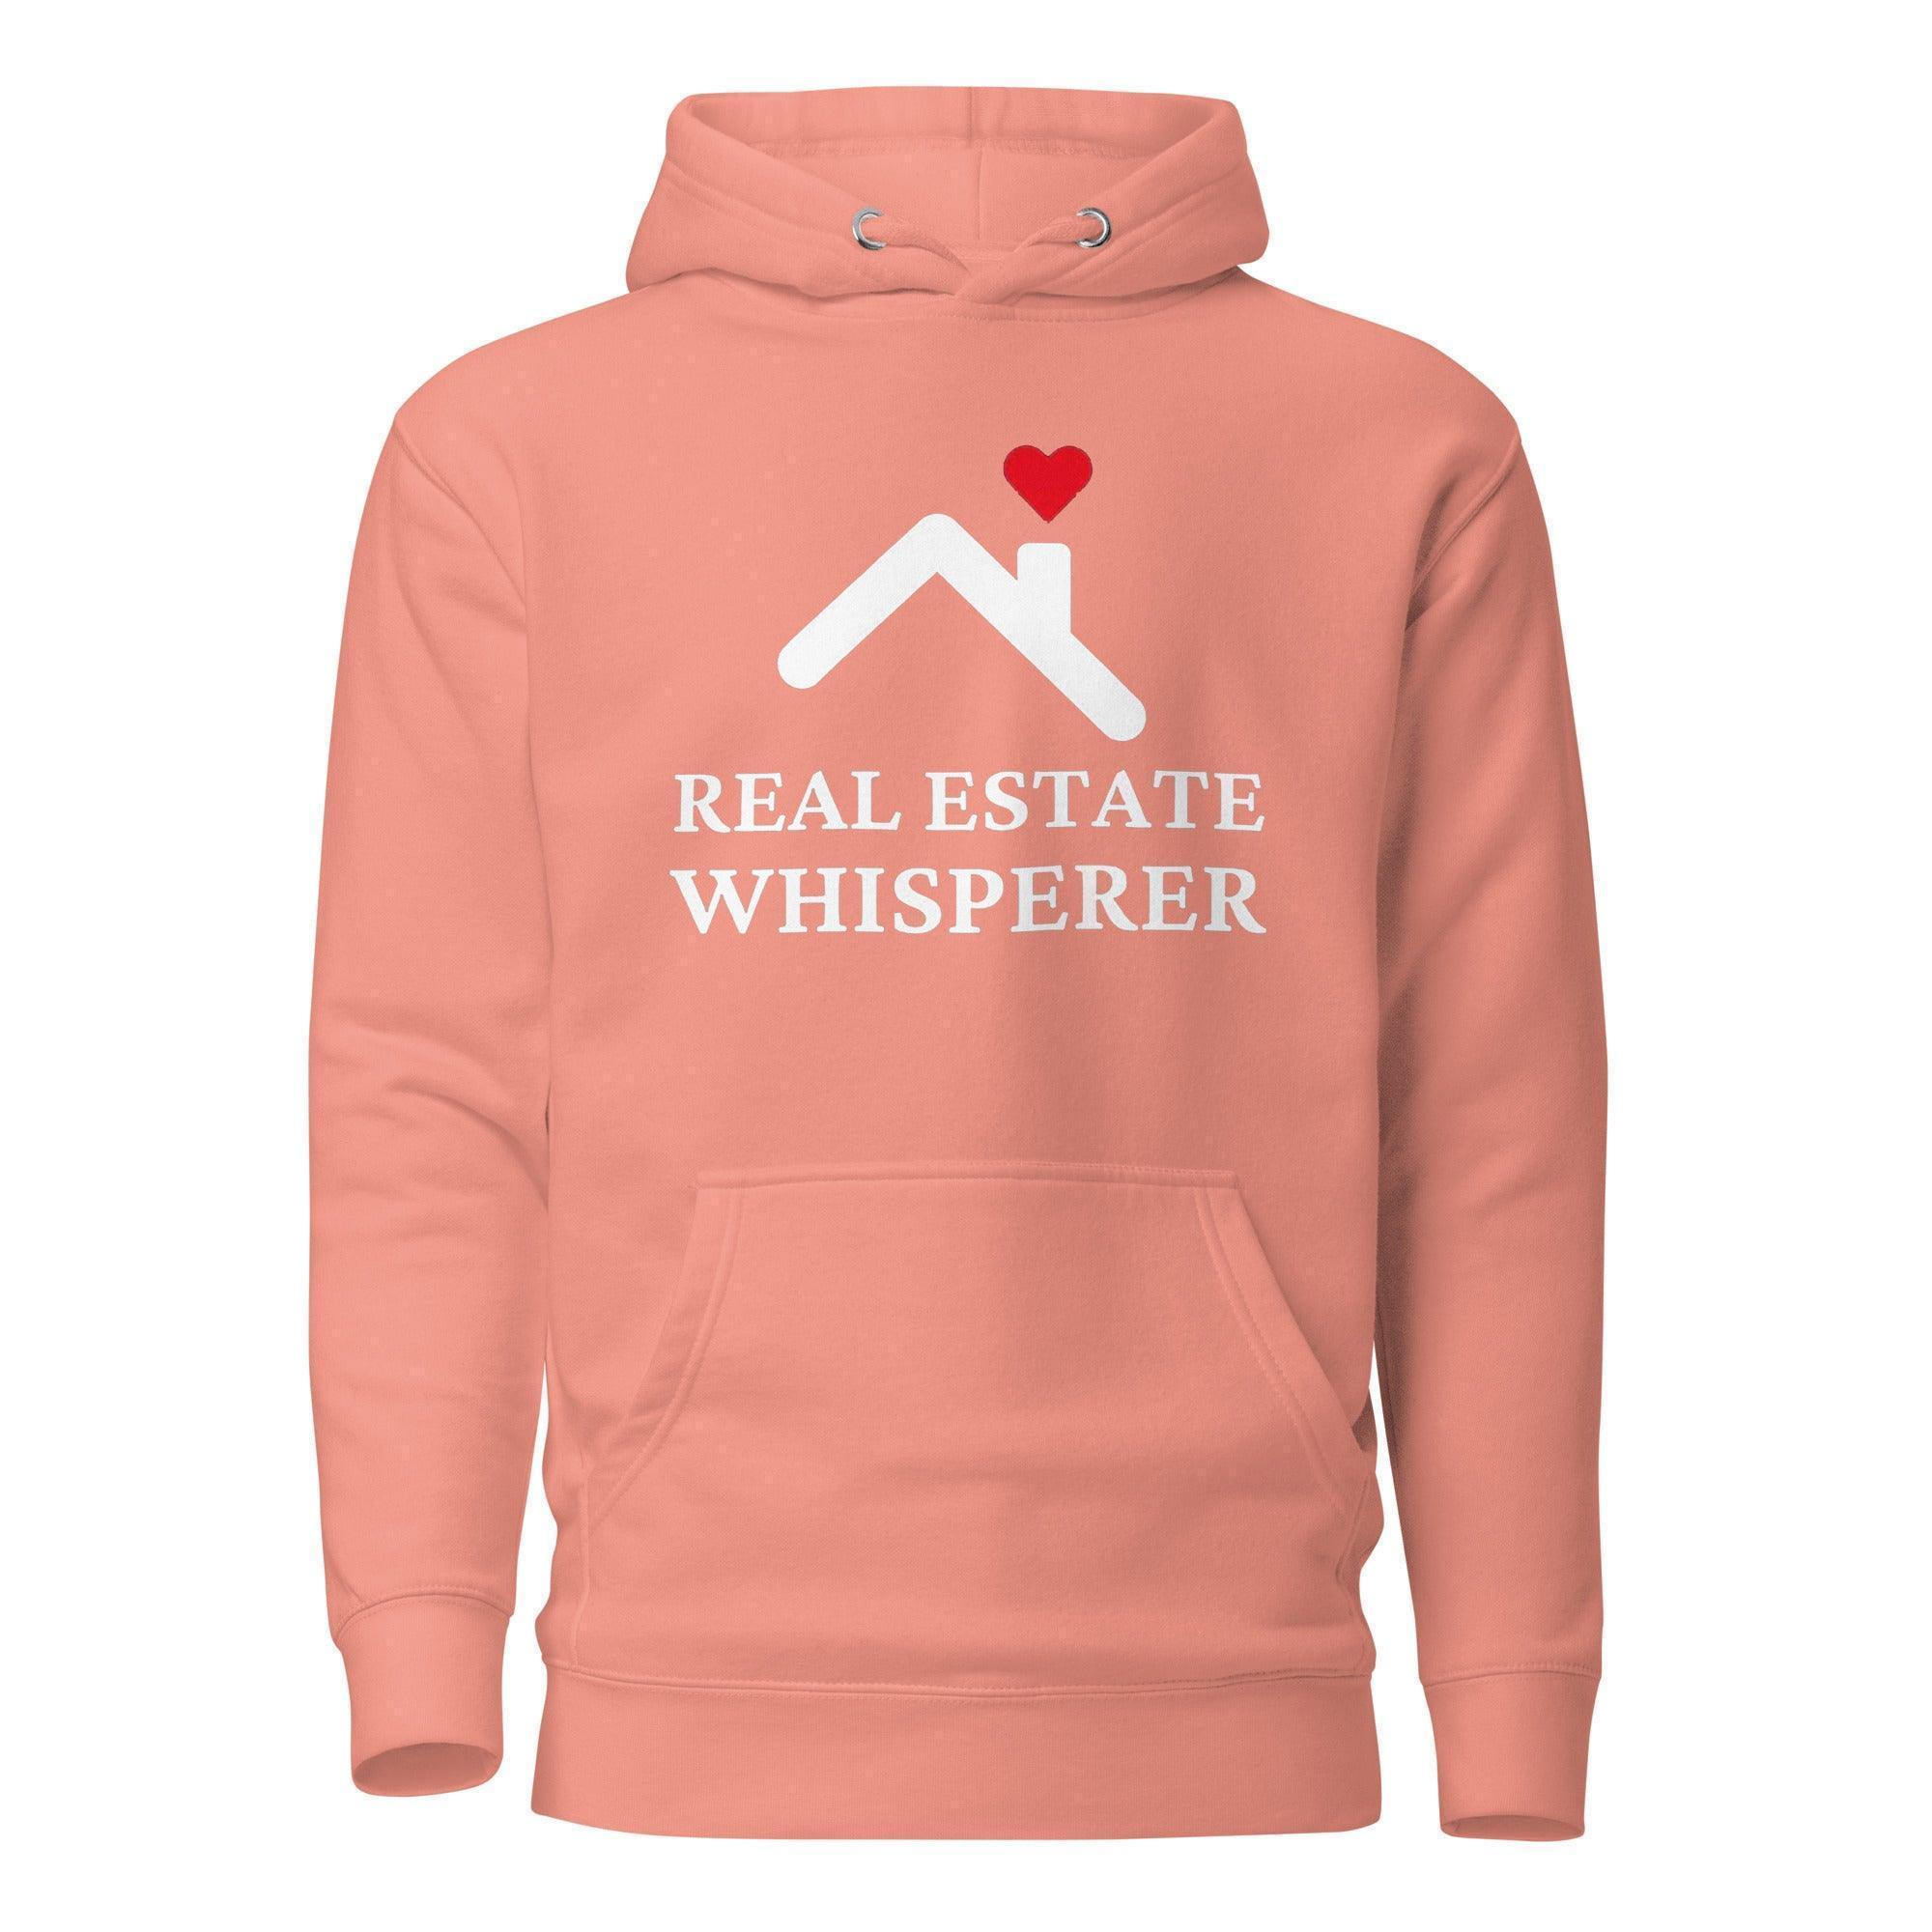 Real Estate Whisperer Pullover Hoodie - InvestmenTees